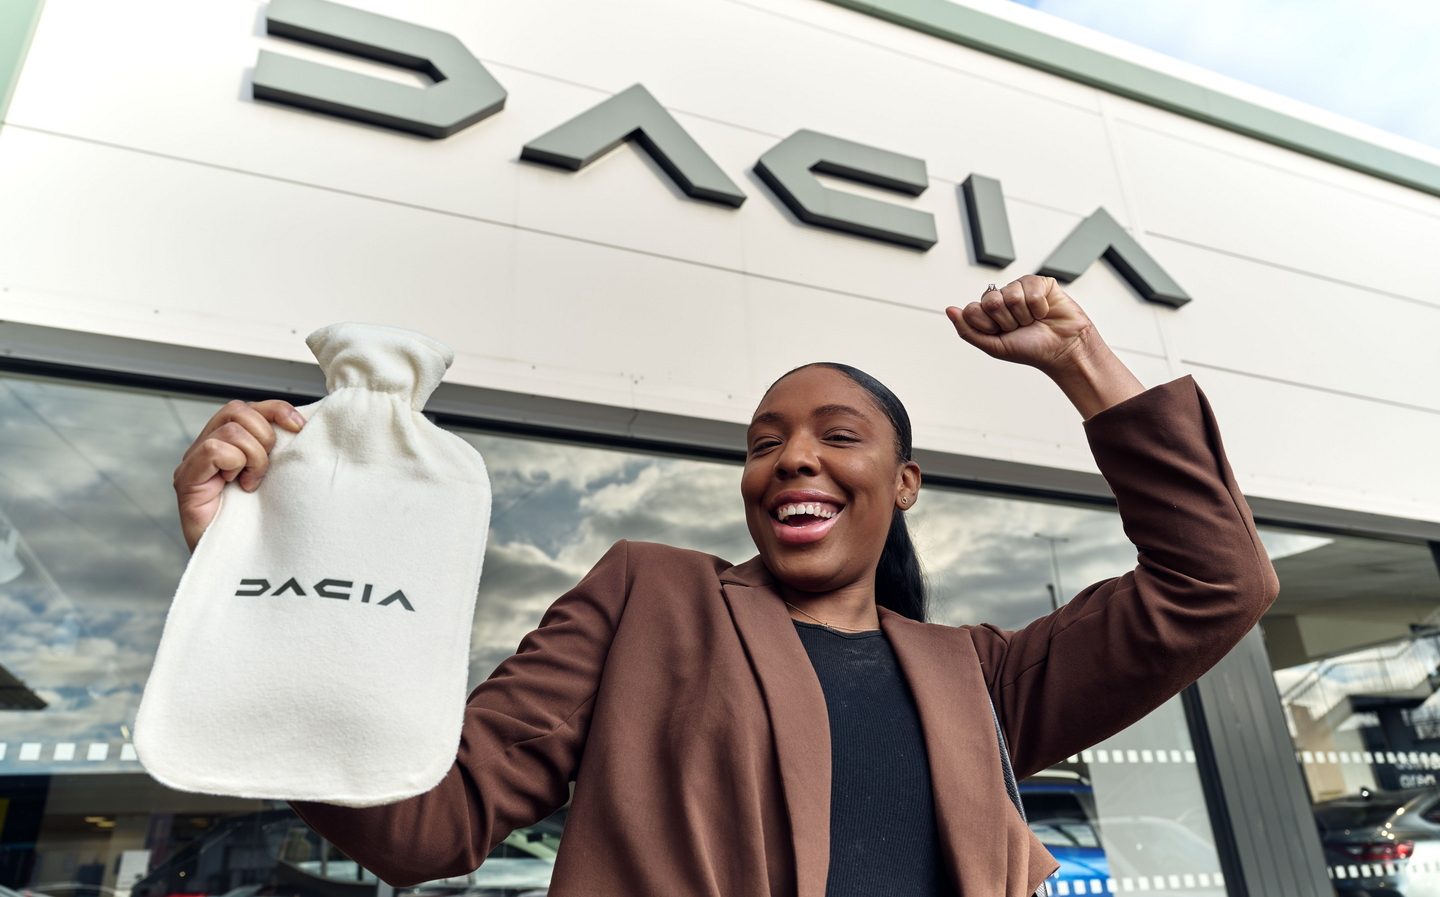 Dacia is offering free hot water bottles to car owners